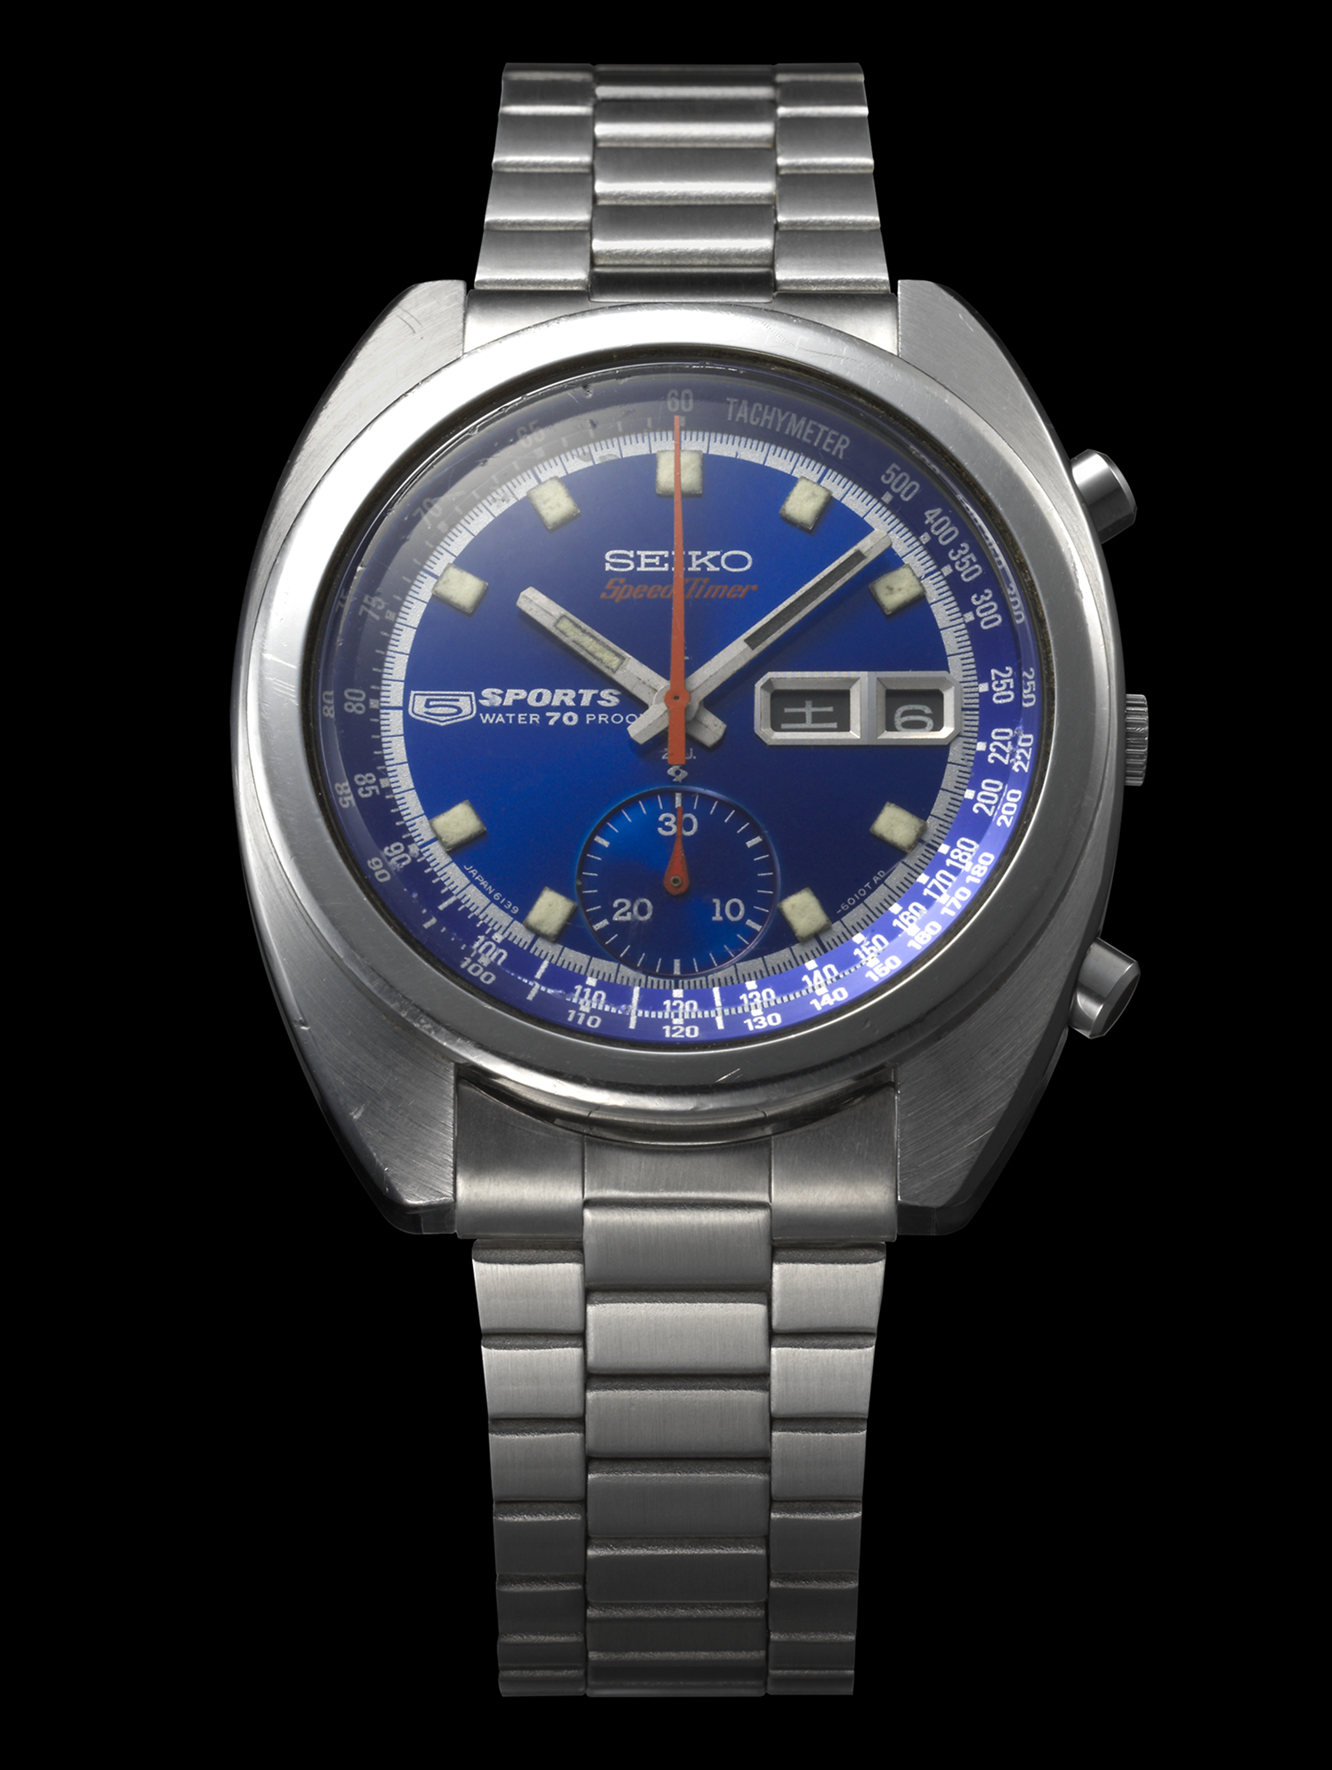 Modern Seiko Speedtimer Highlights Pioneering Launch Of Its Own 1969  Automatic Chronograph